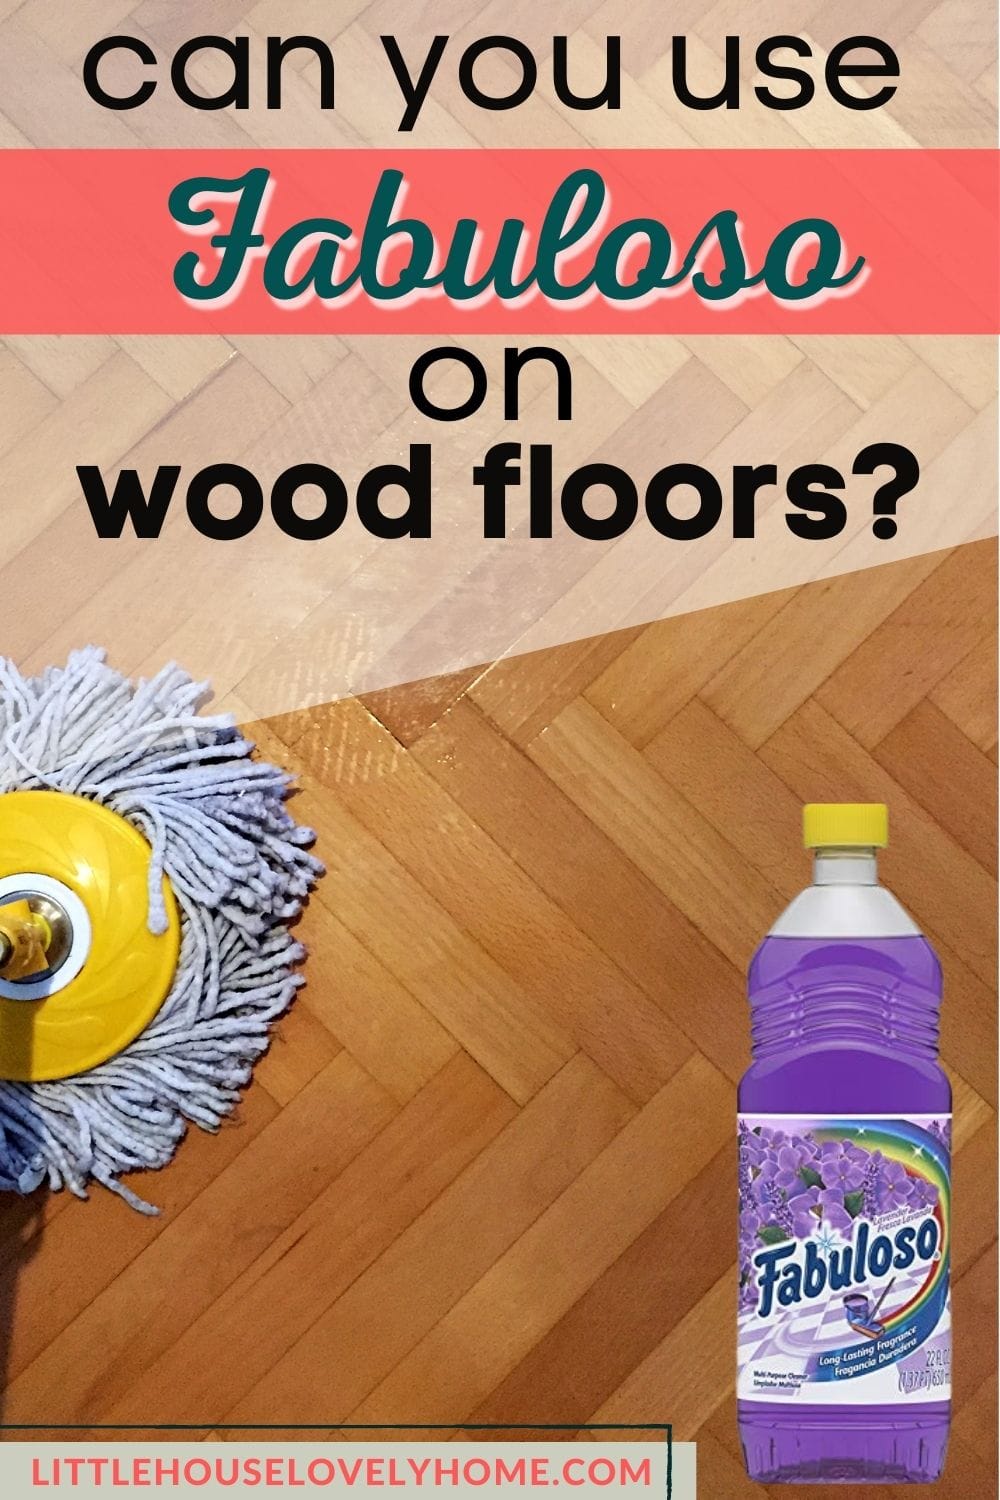 Photo showing a mop on wooden floor, an overlay image of purple bottle and a text overlay that reads Can you use Fabuloso on Wooden Floor